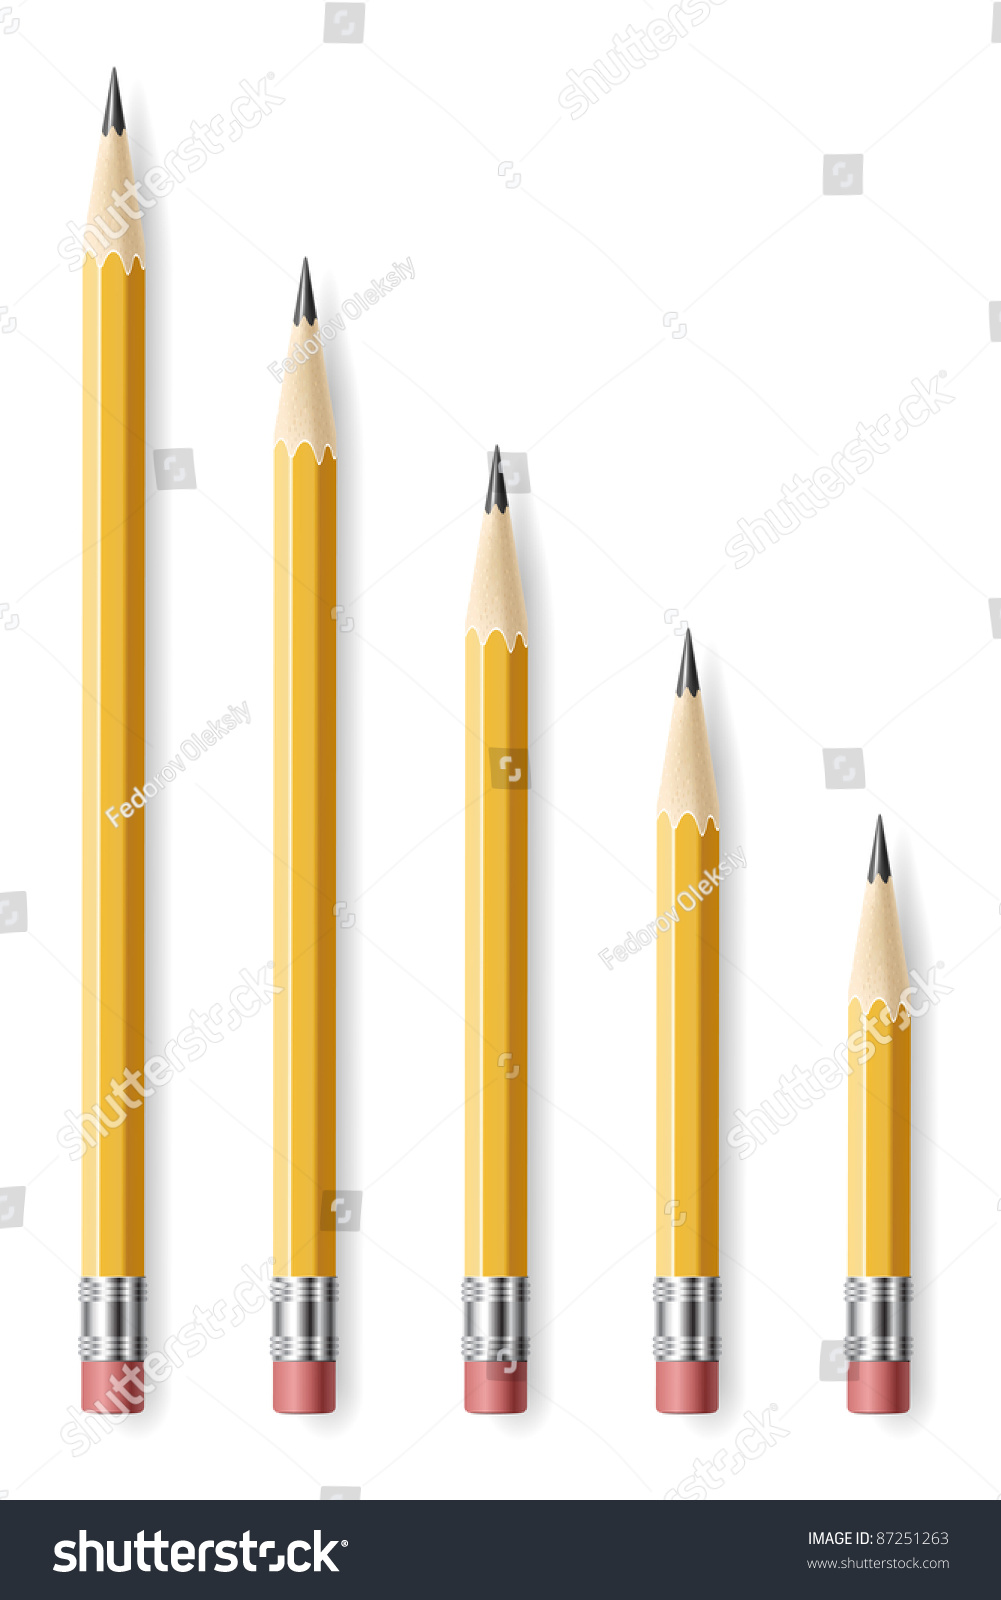 Lead Pencils Various Length On White Background. Stock Vector